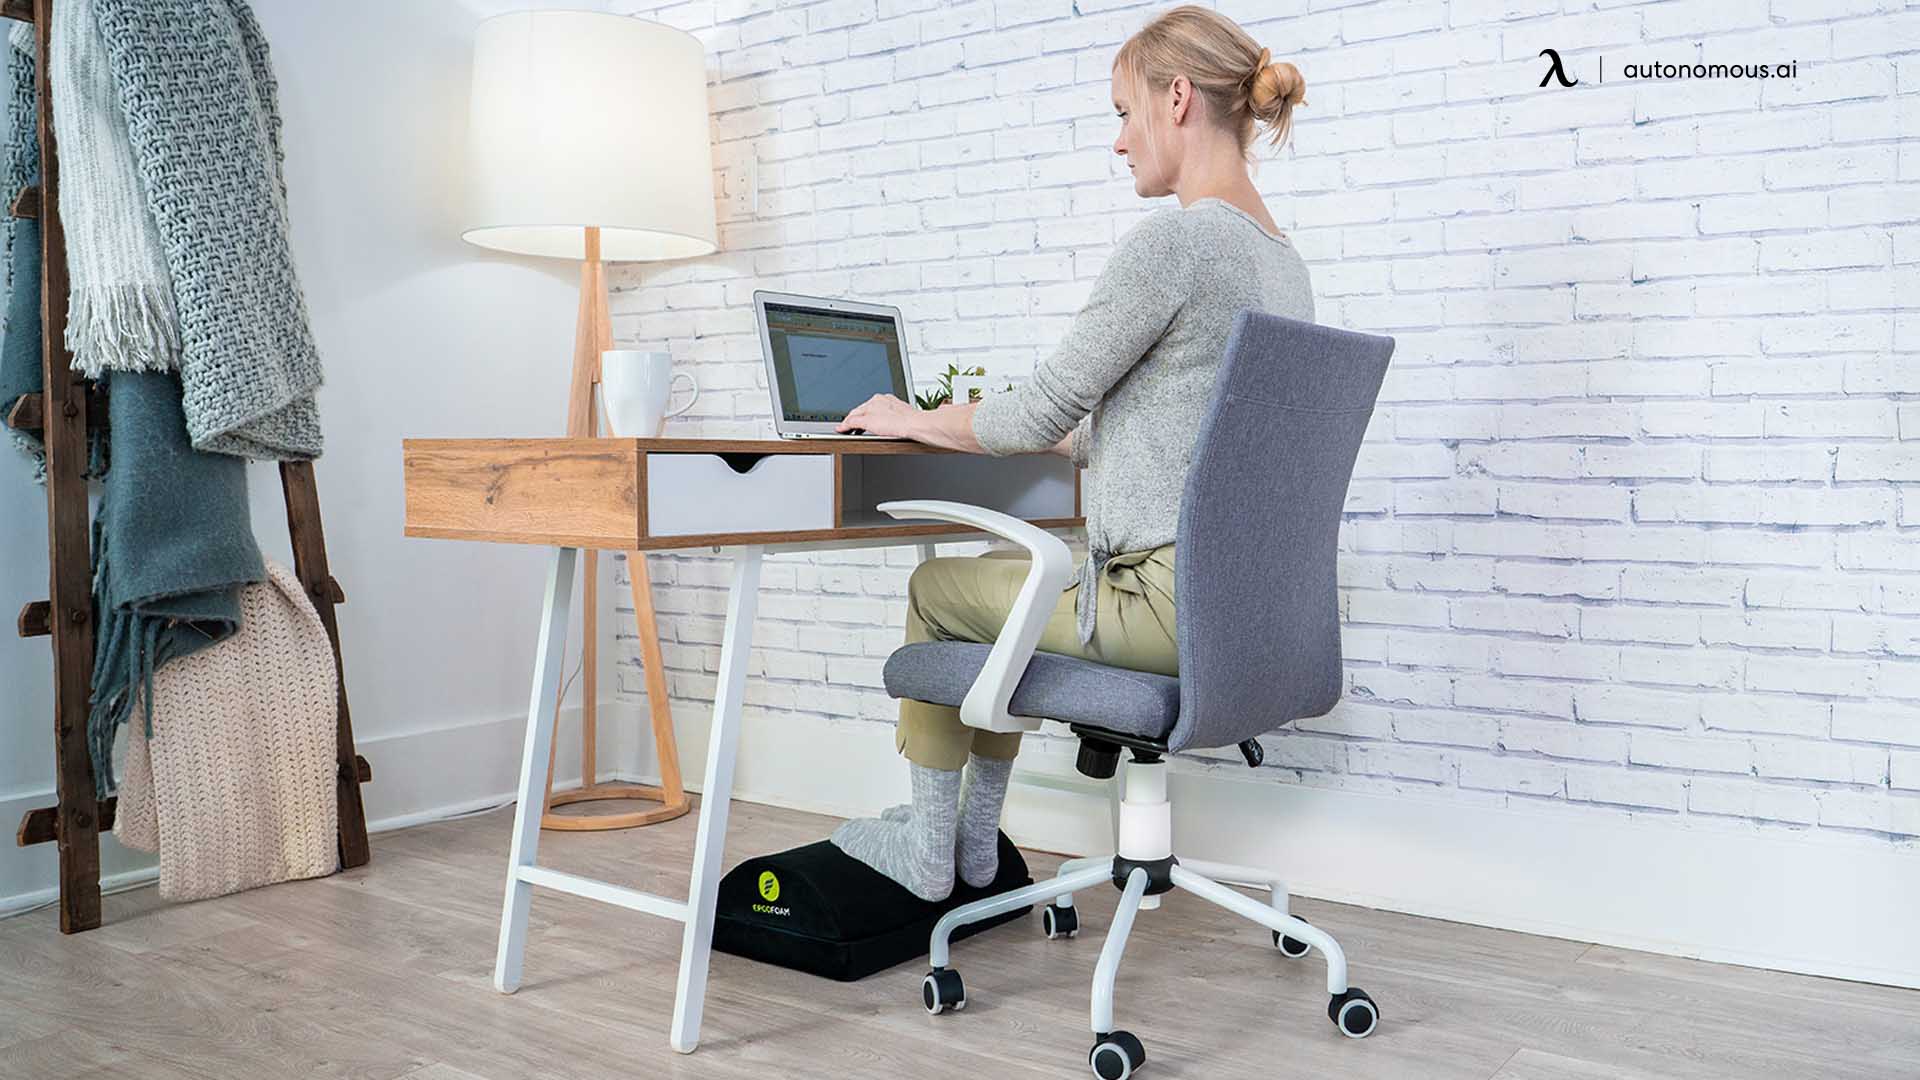 Benefits of Office Chair Footrest Attachment in a Chair